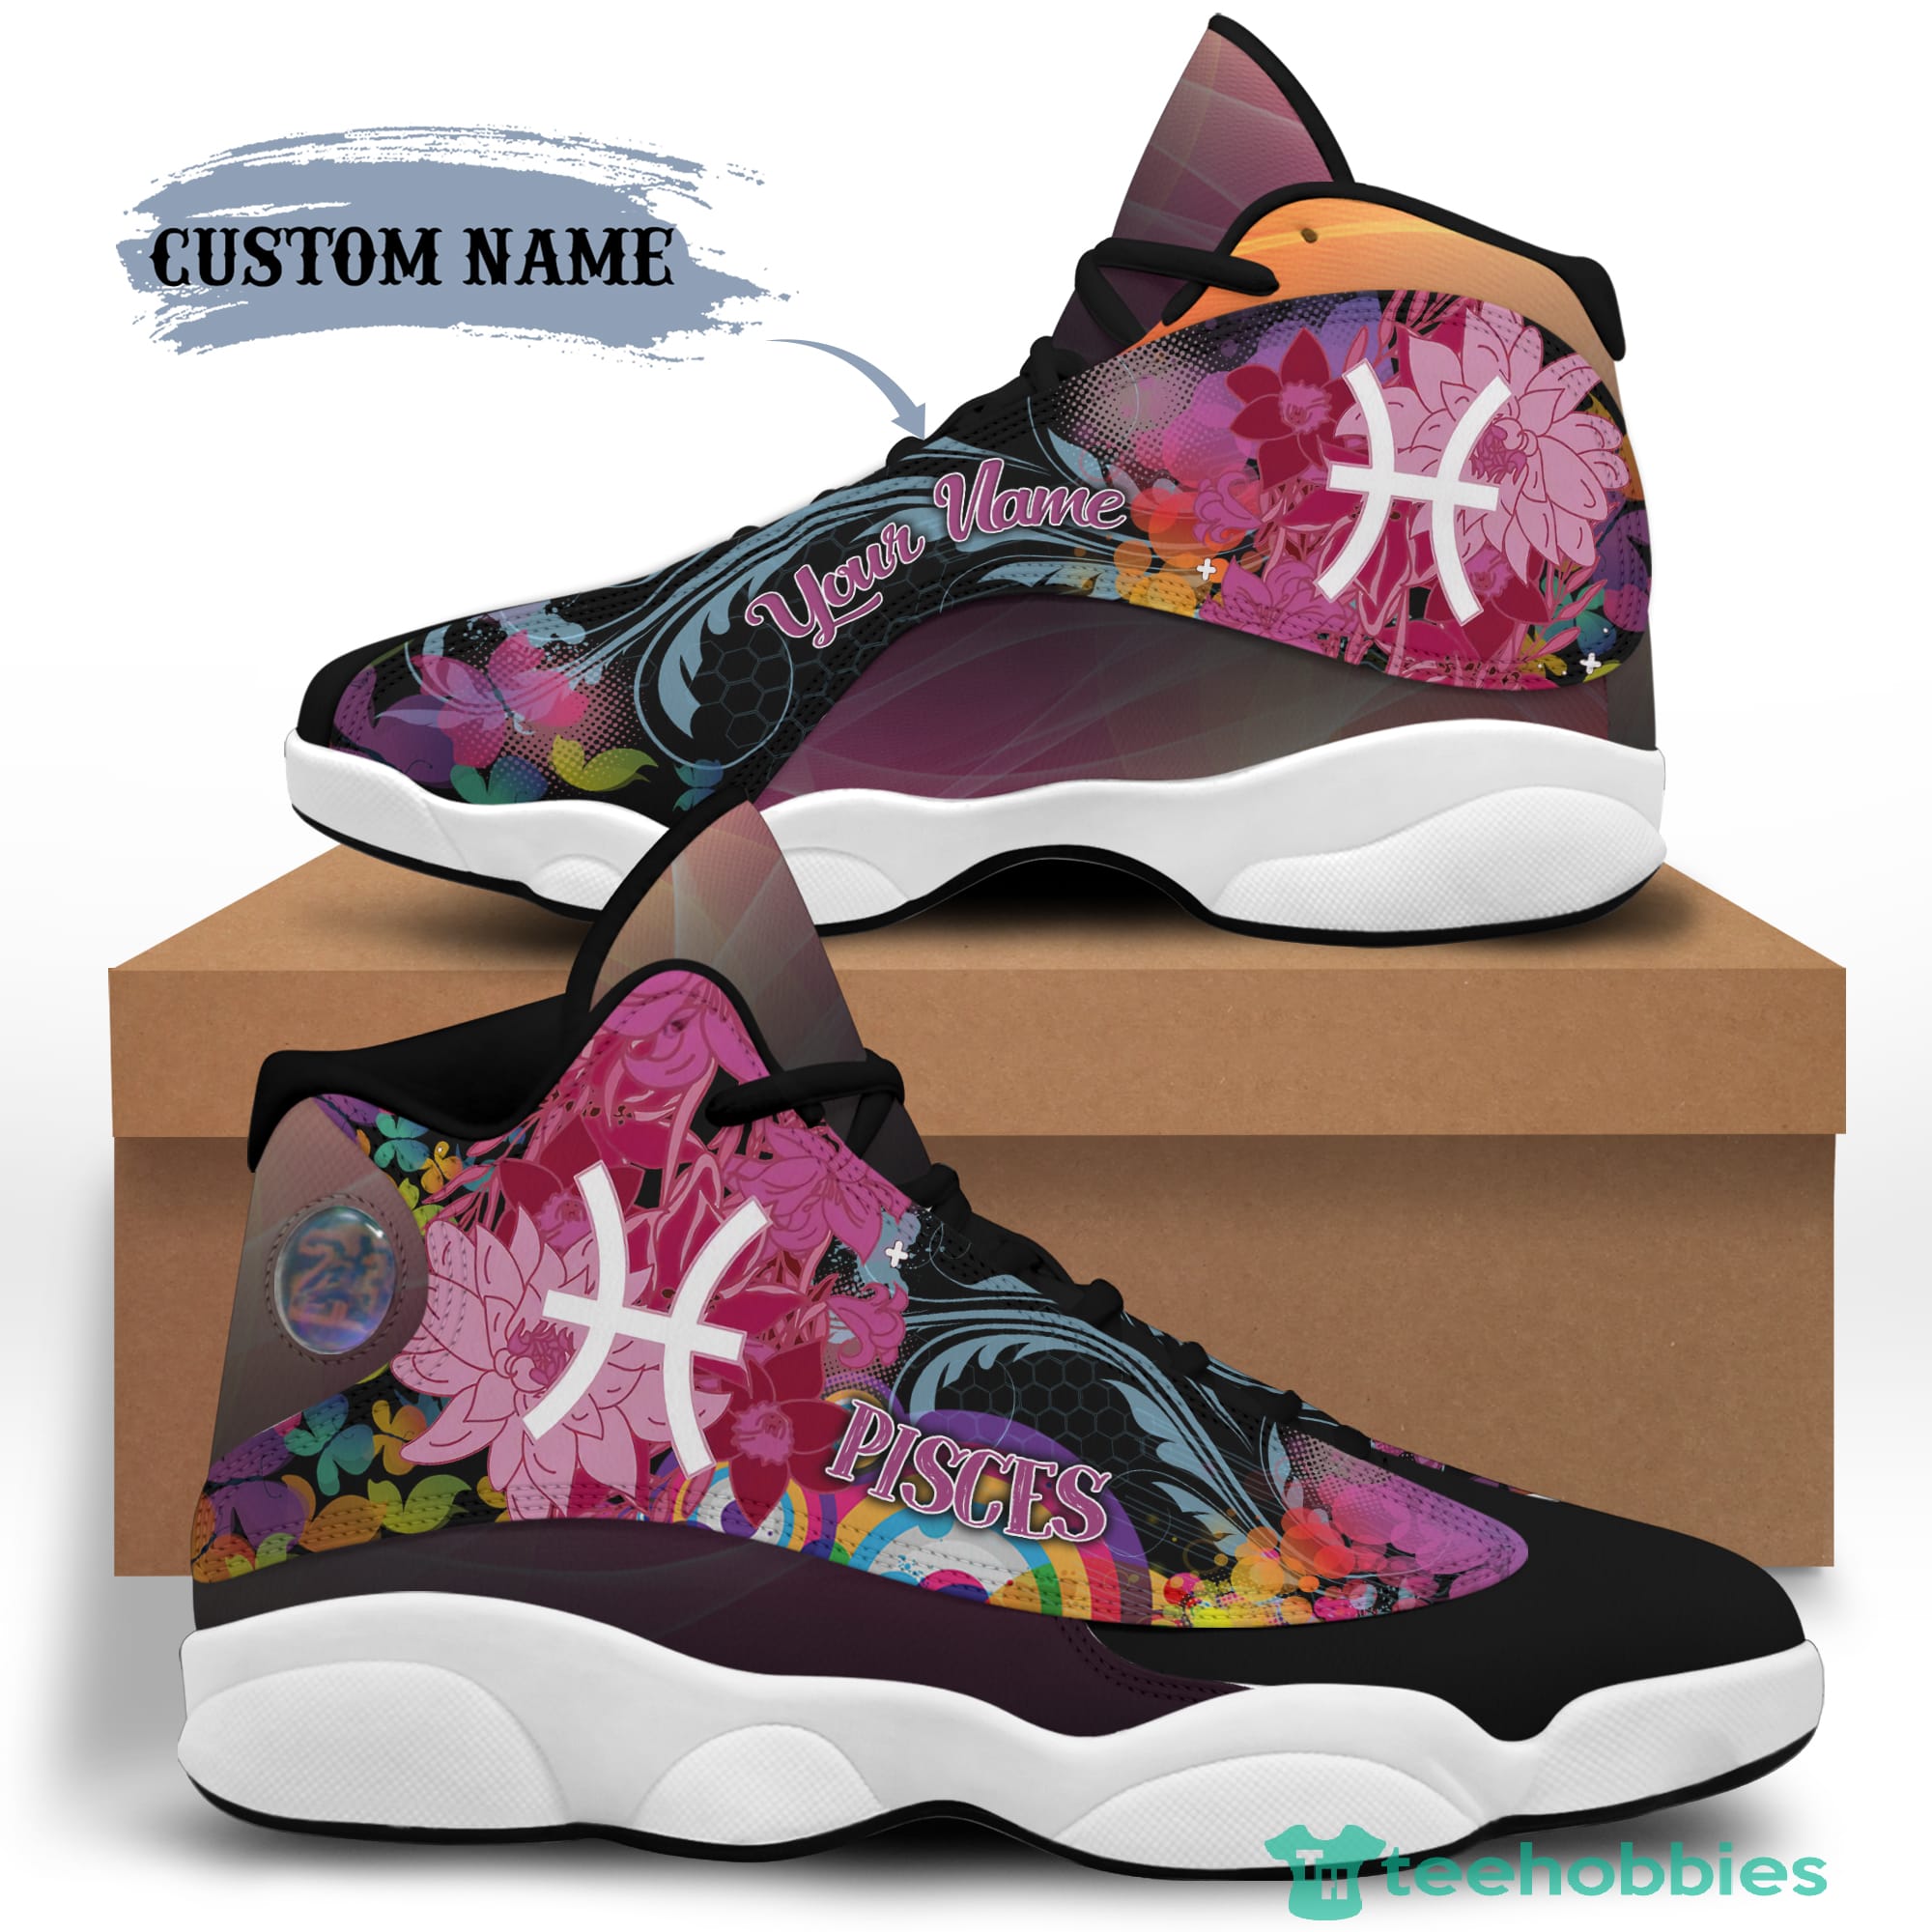 Pisces Birthday Gift Personalized Name Air Jordan 13 Shoes SKU87